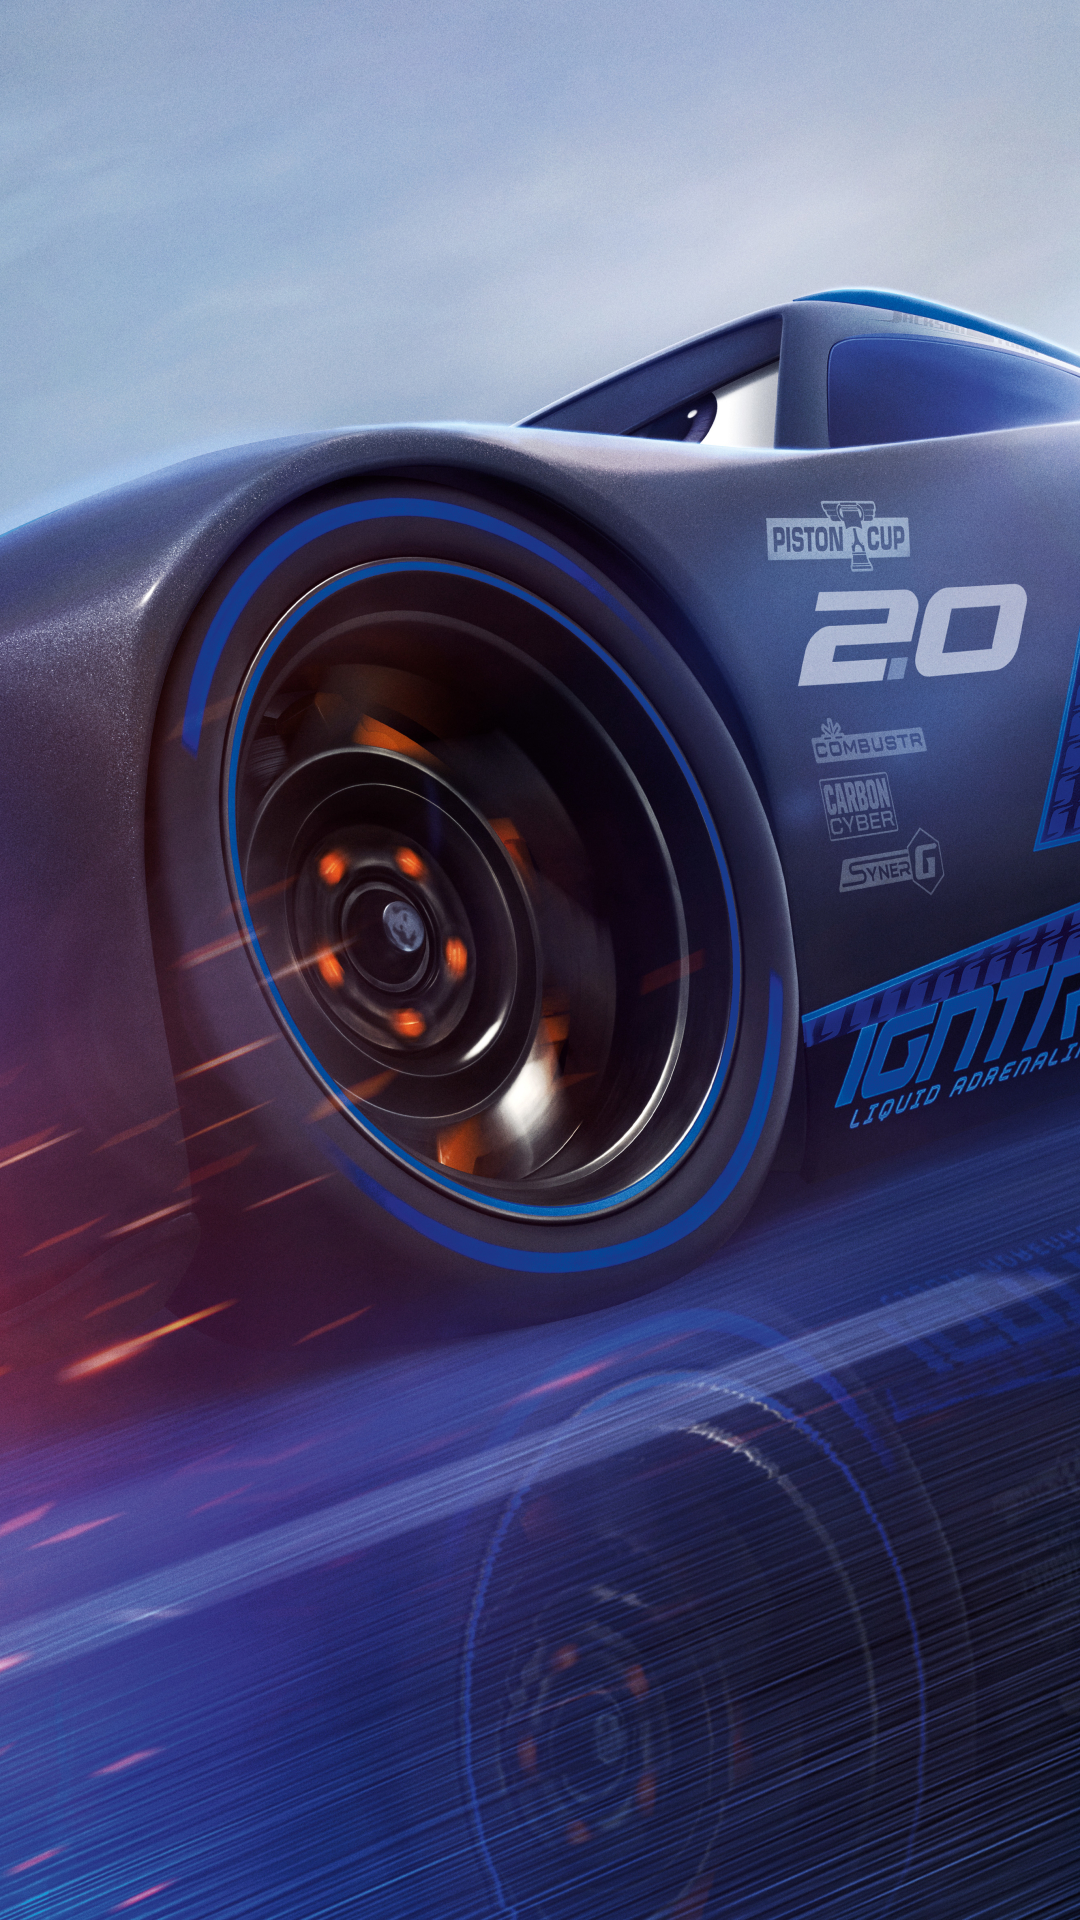 cars 3, jackson storm, movie lock screen backgrounds